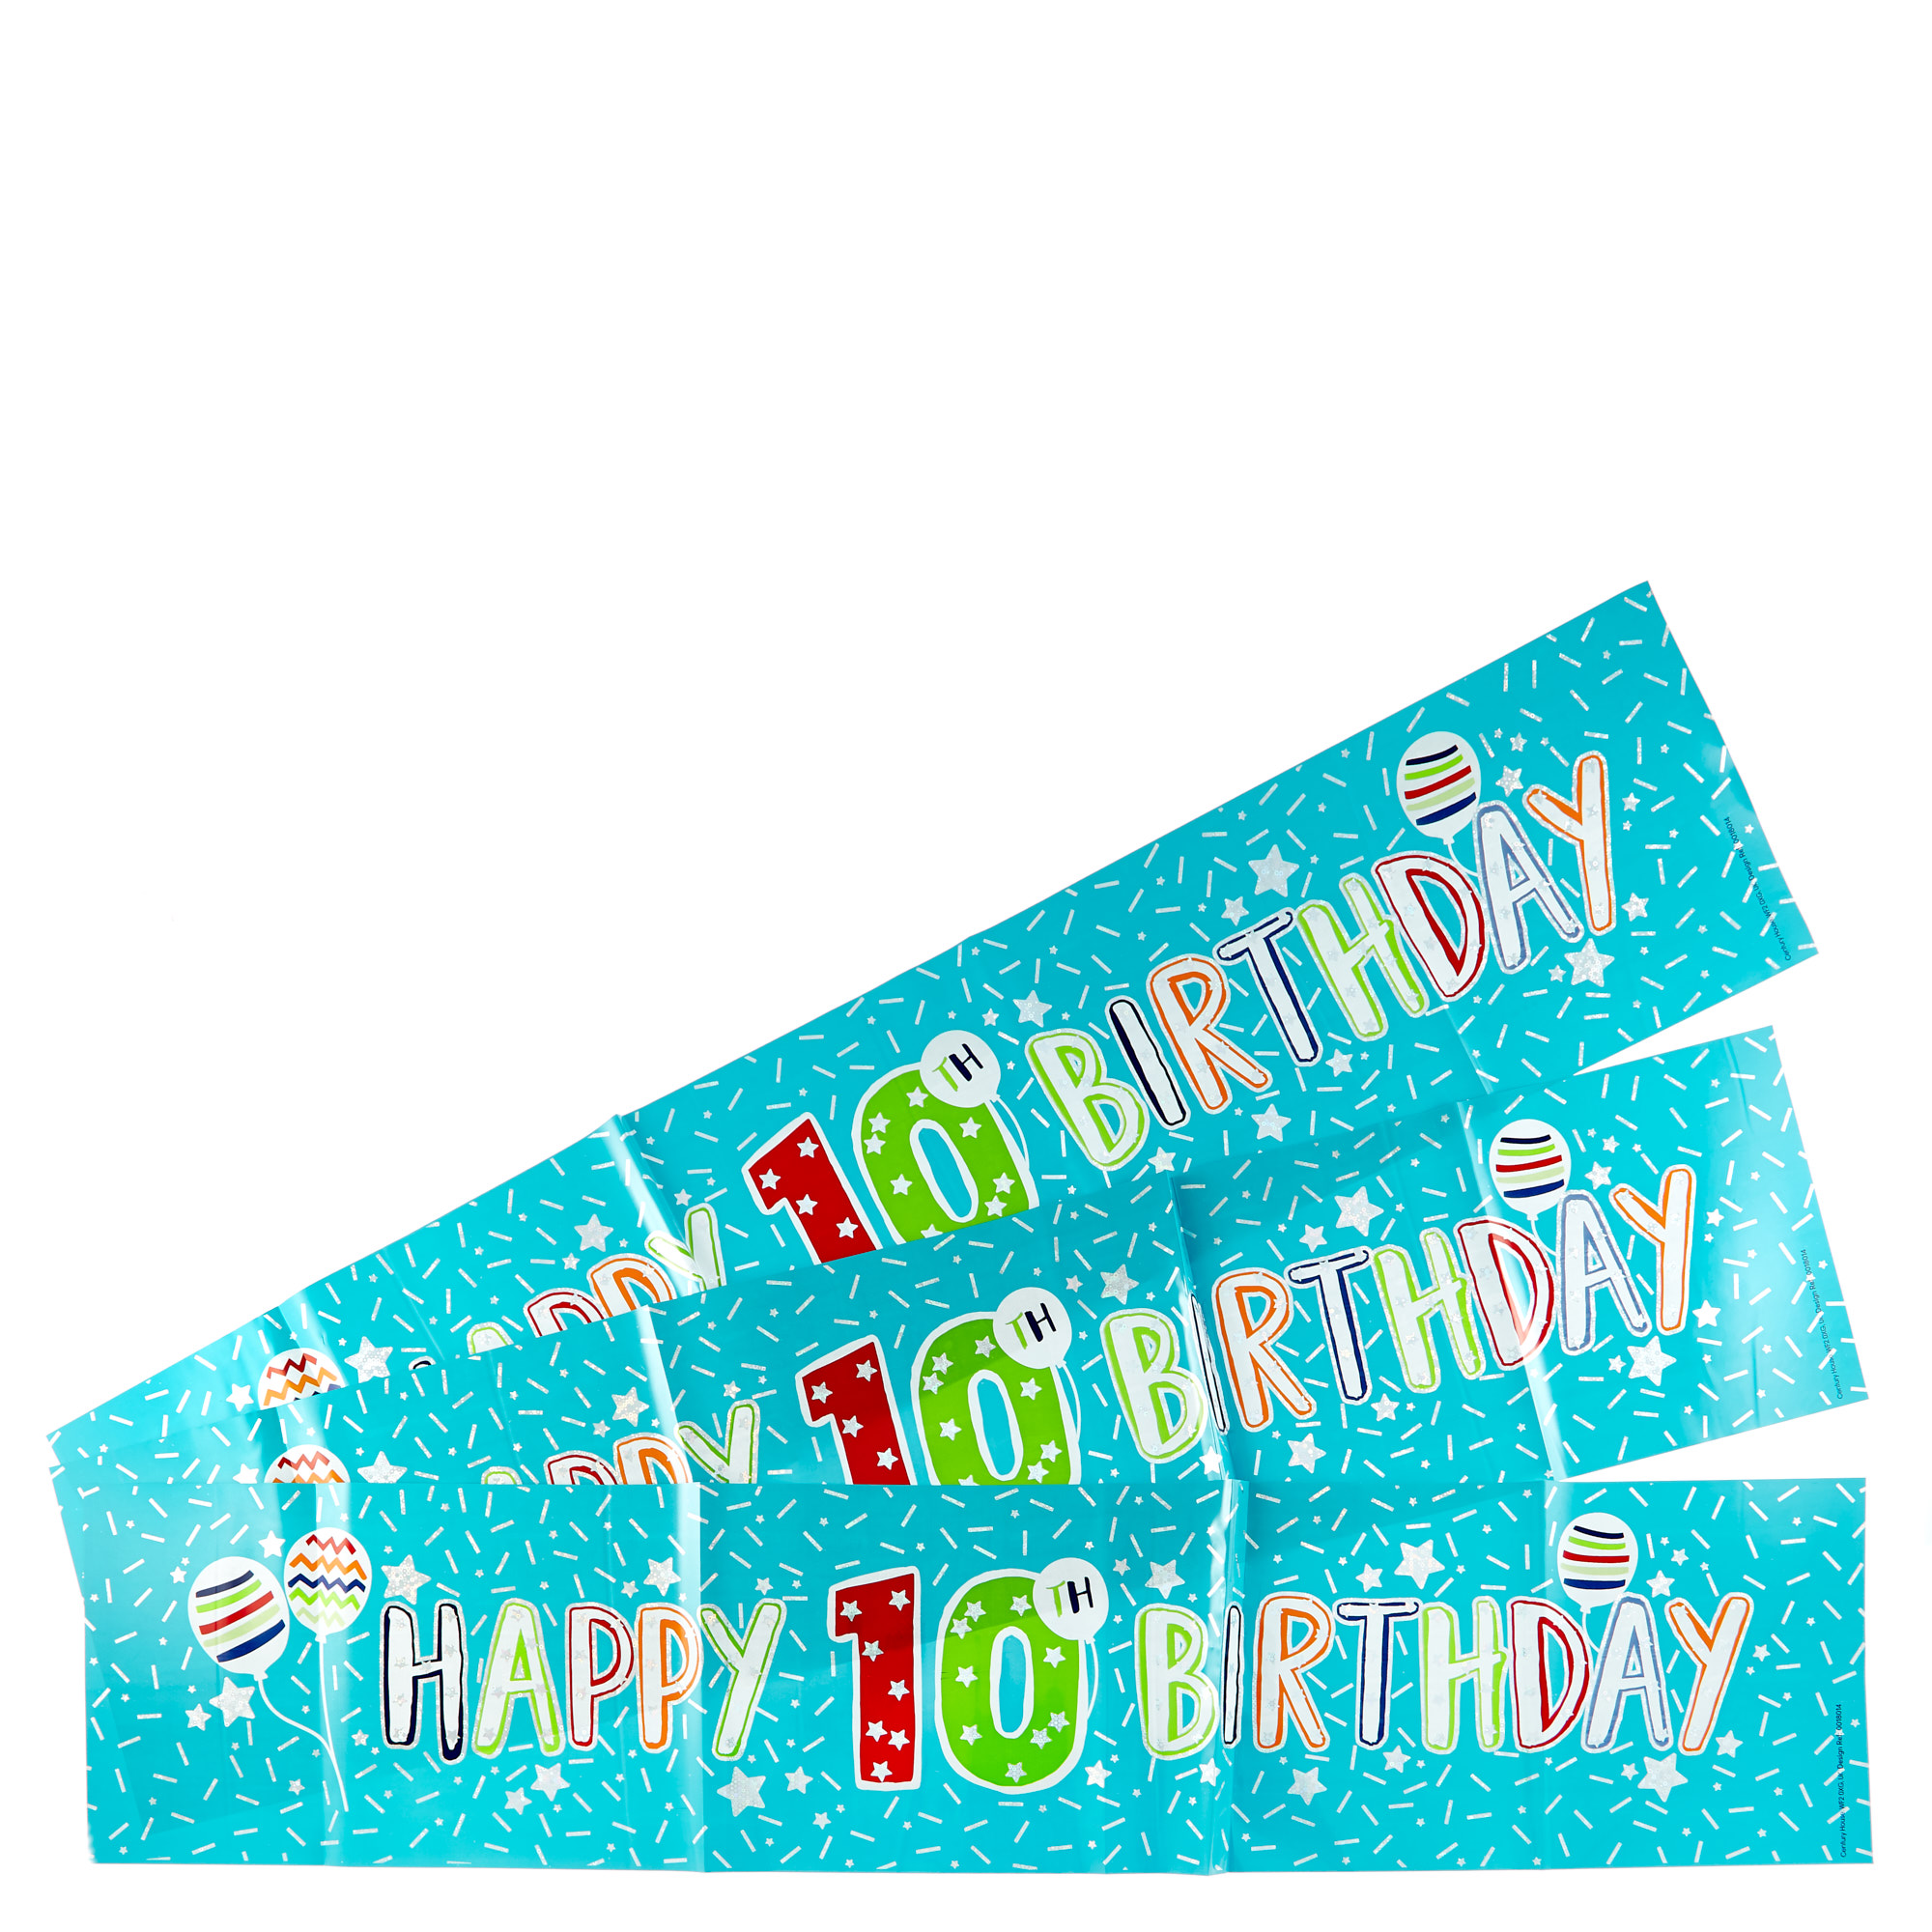 Holographic 10th Birthday Party Banners - Pack Of 3 